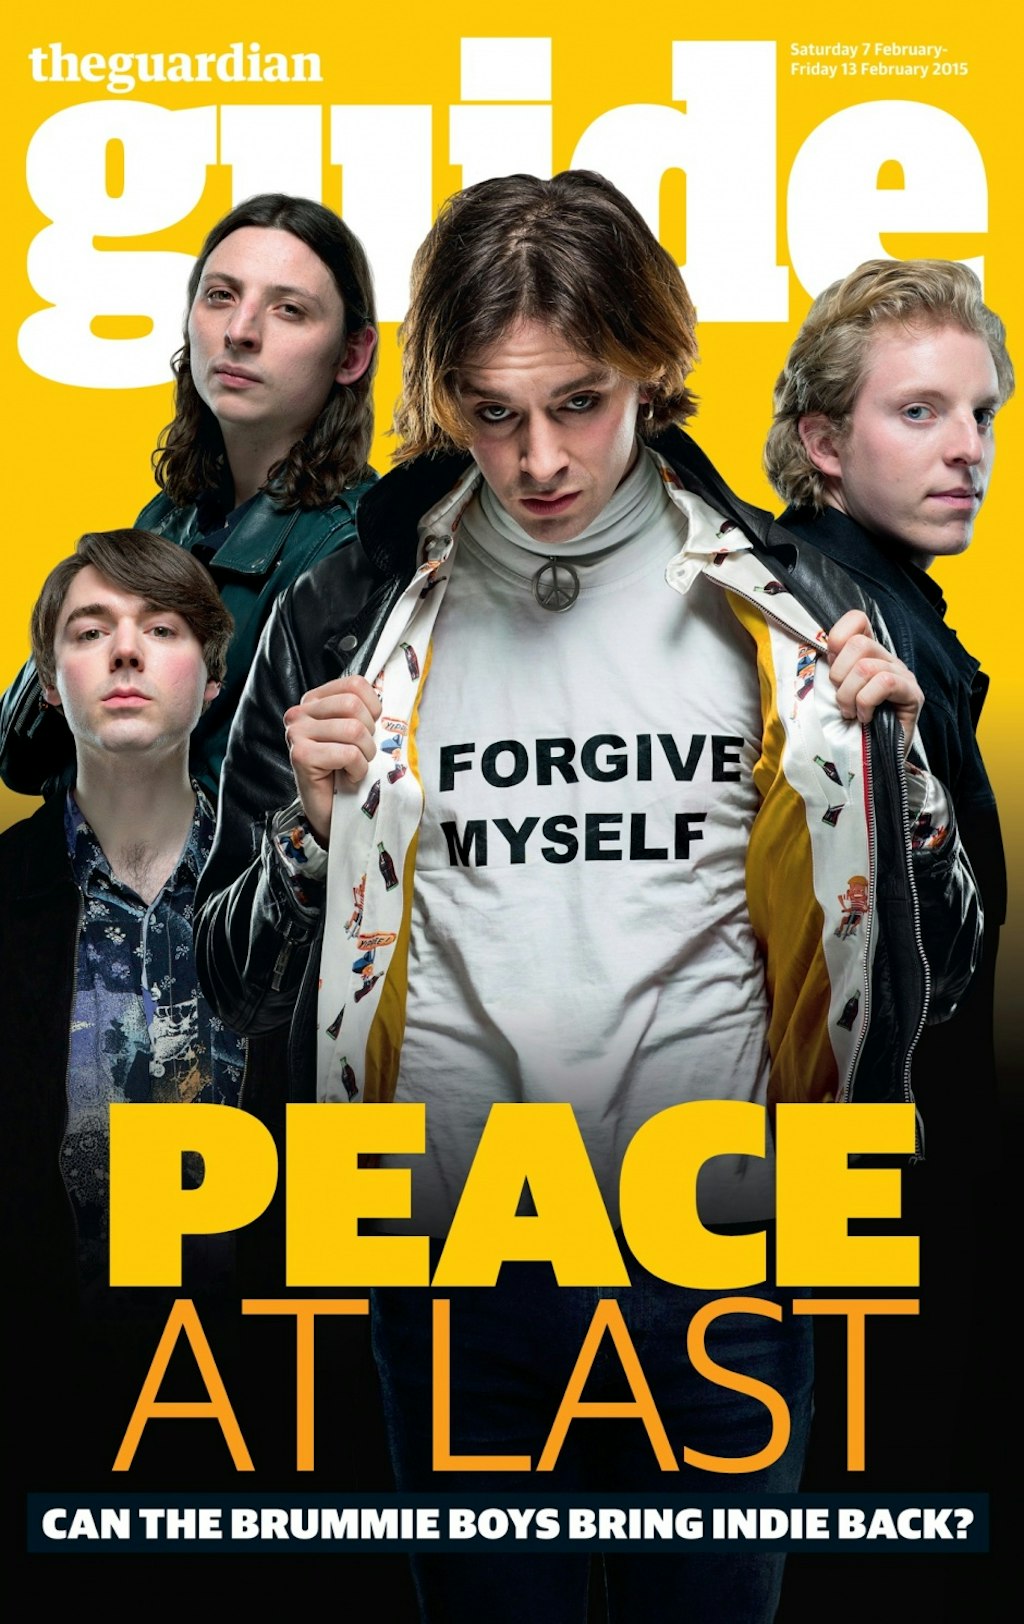 THE GUARDIAN GUIDE Cover - Peace